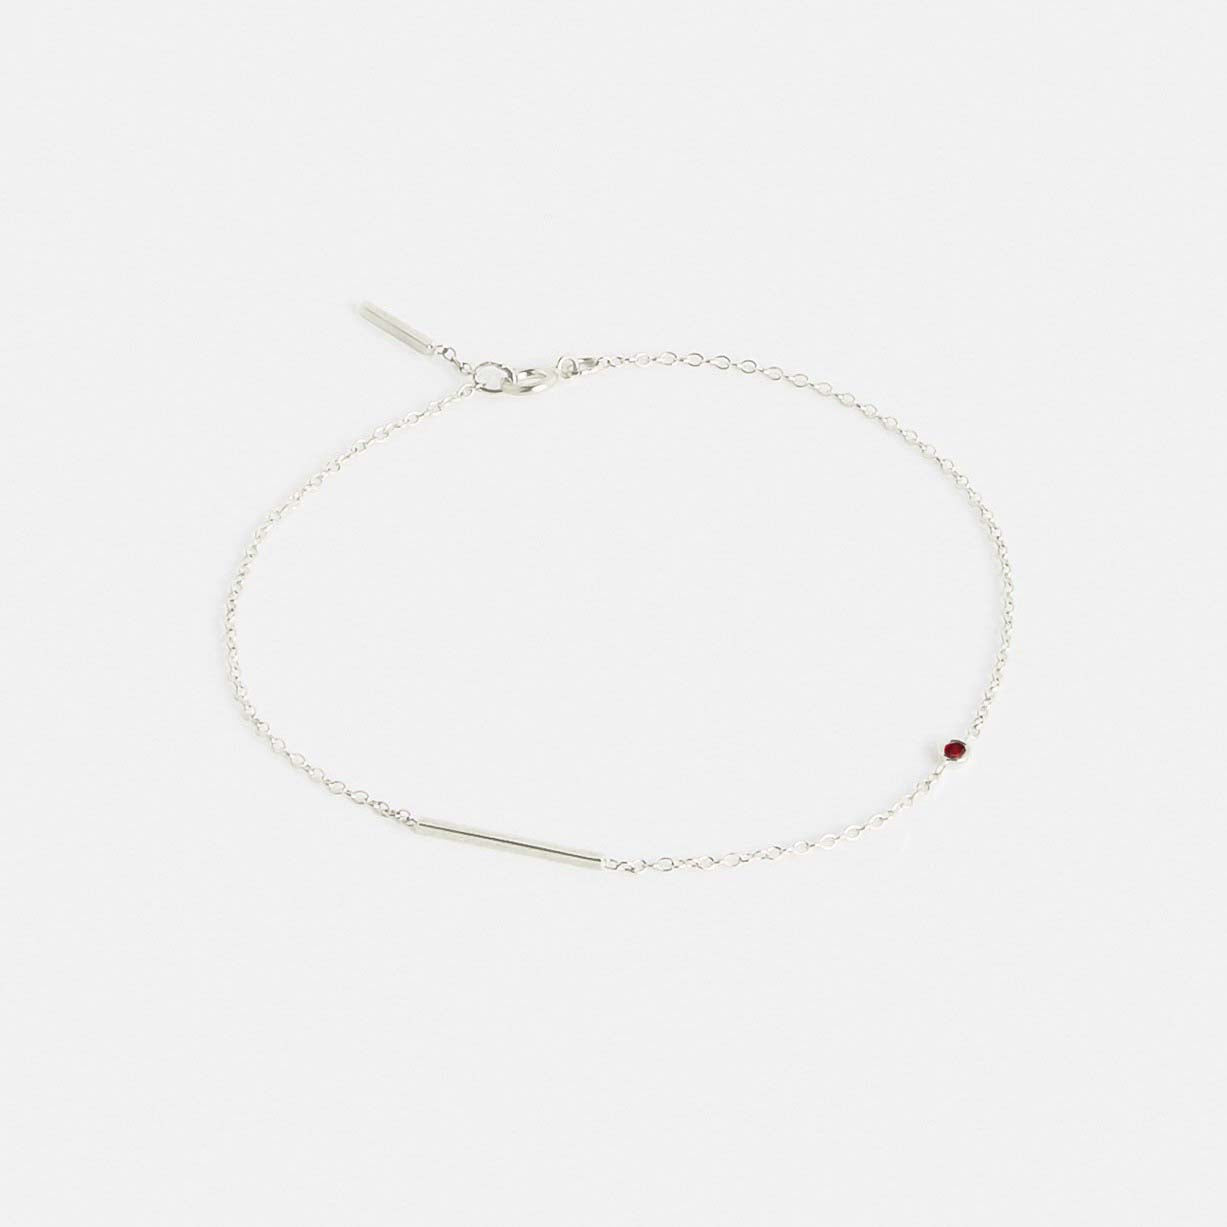 Iki Simple Bracelet in 14k White Gold set with Ruby By SHW Fine Jewelry NYC